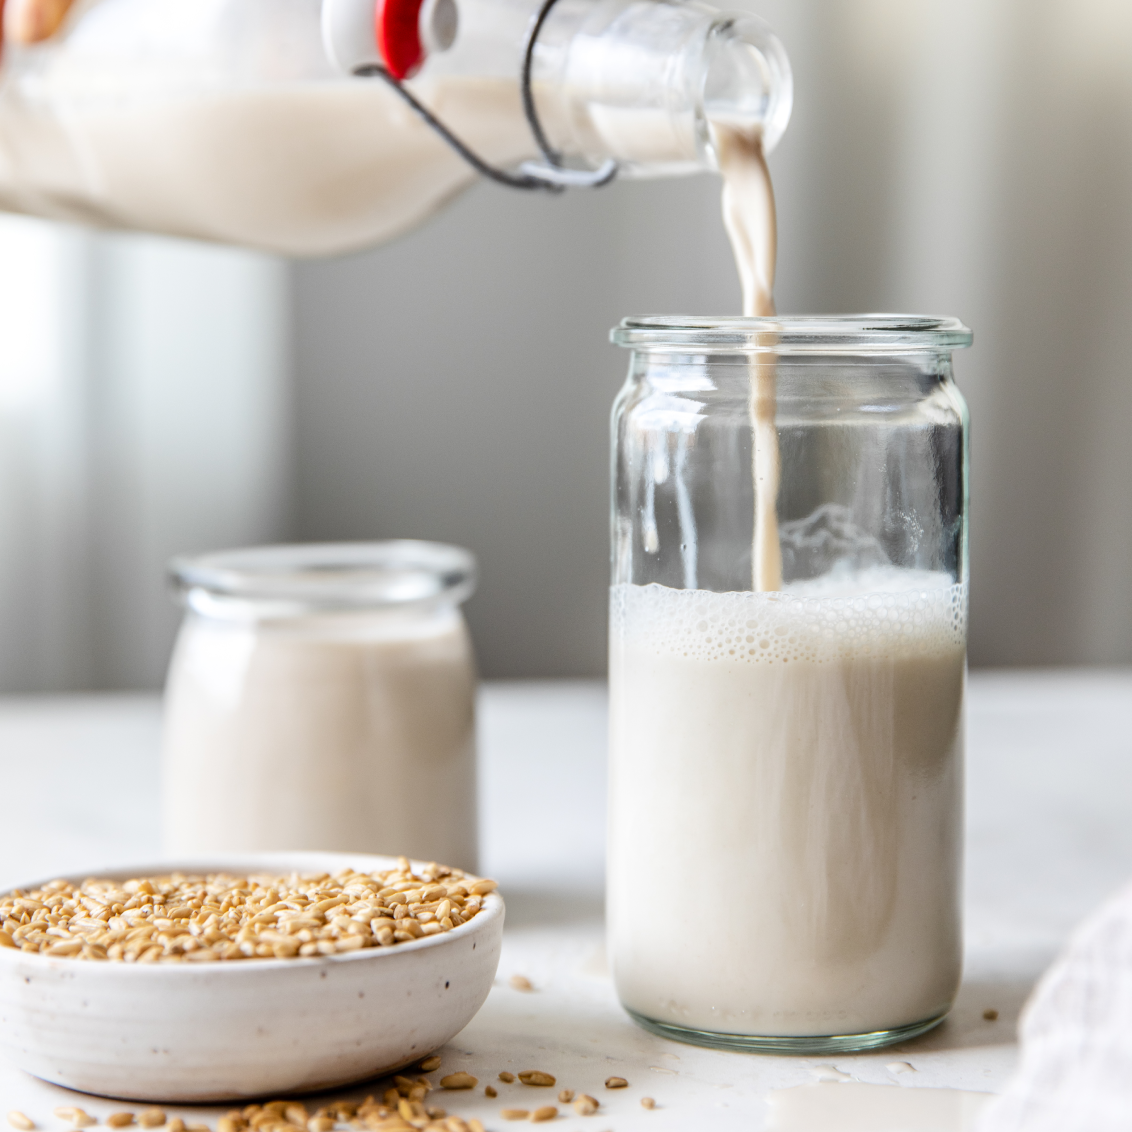 Creamy Pro Oat Milk from Almond Cow being poured into a glass cup